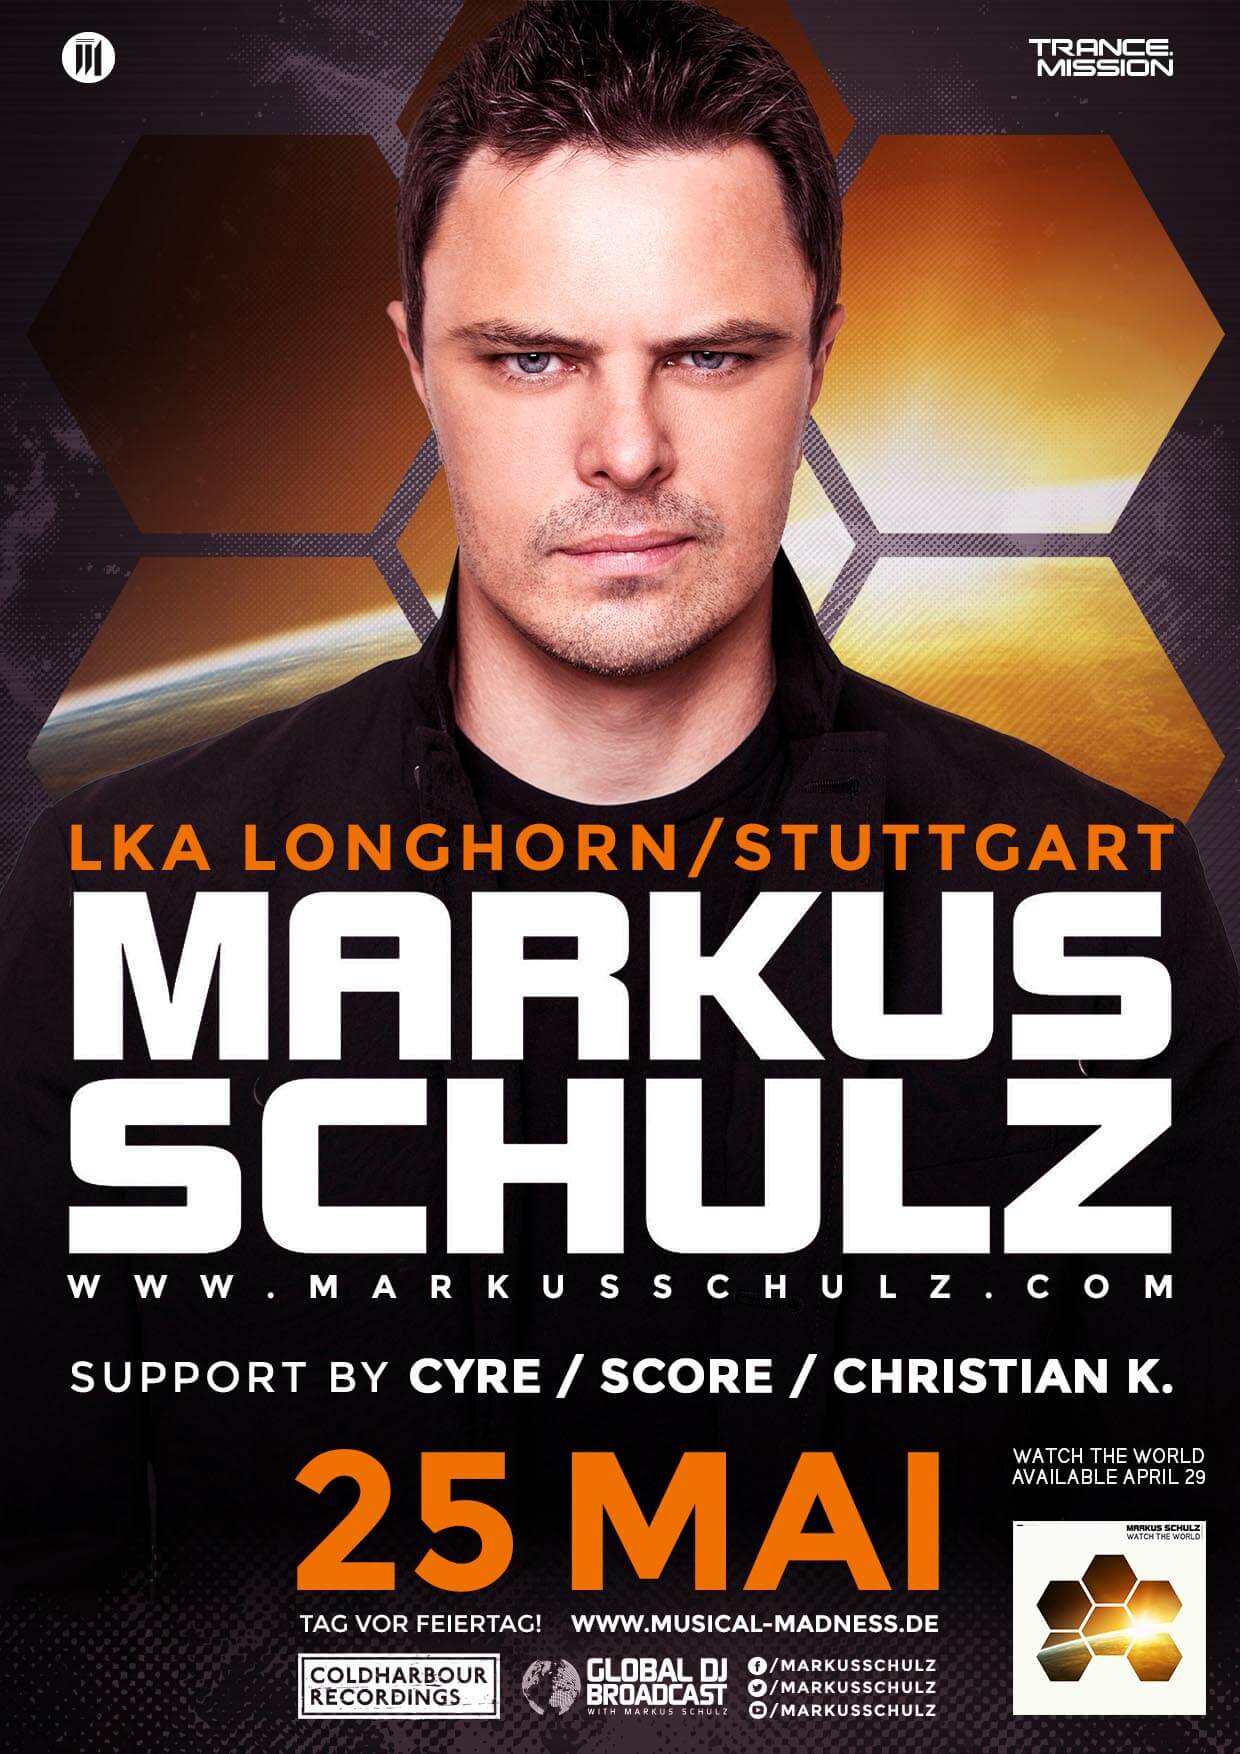 Trance.Mission and Musical Madness presents Markus Schulz at LKA Longhorn, Stuttgart, Germany on 25th of May 2016